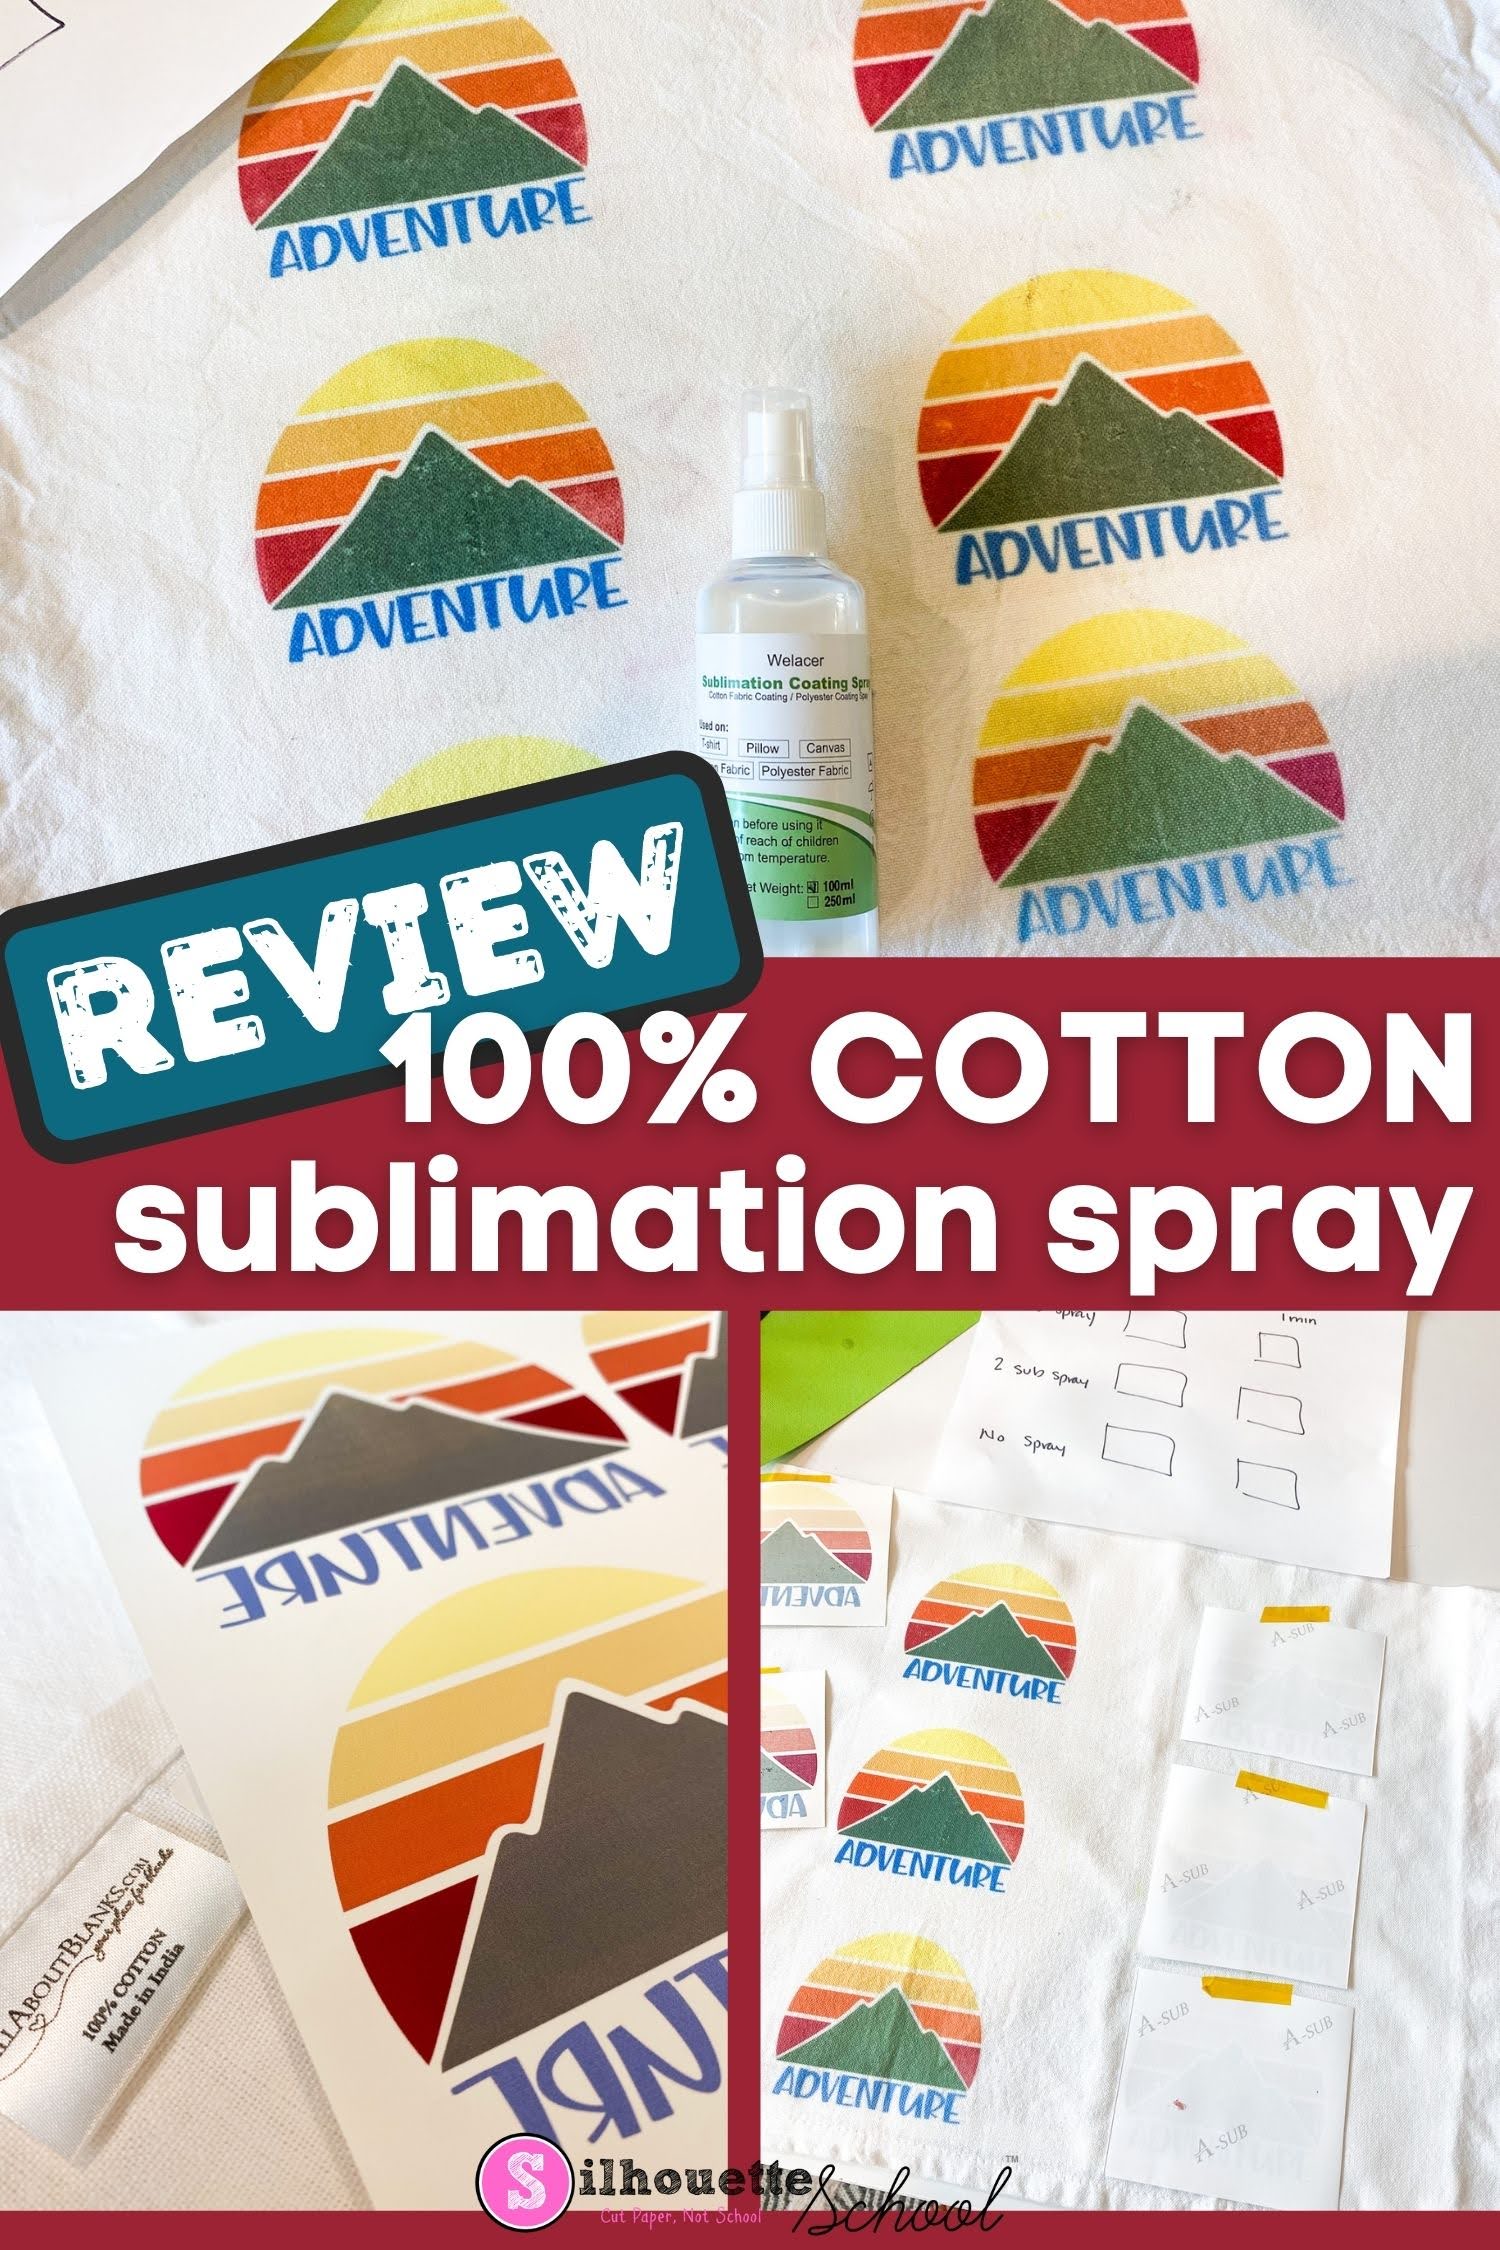 poly-t-plus-sublimation-coating-for-cotton-cotton-blends-dyepress-graphic-supply-sublimation